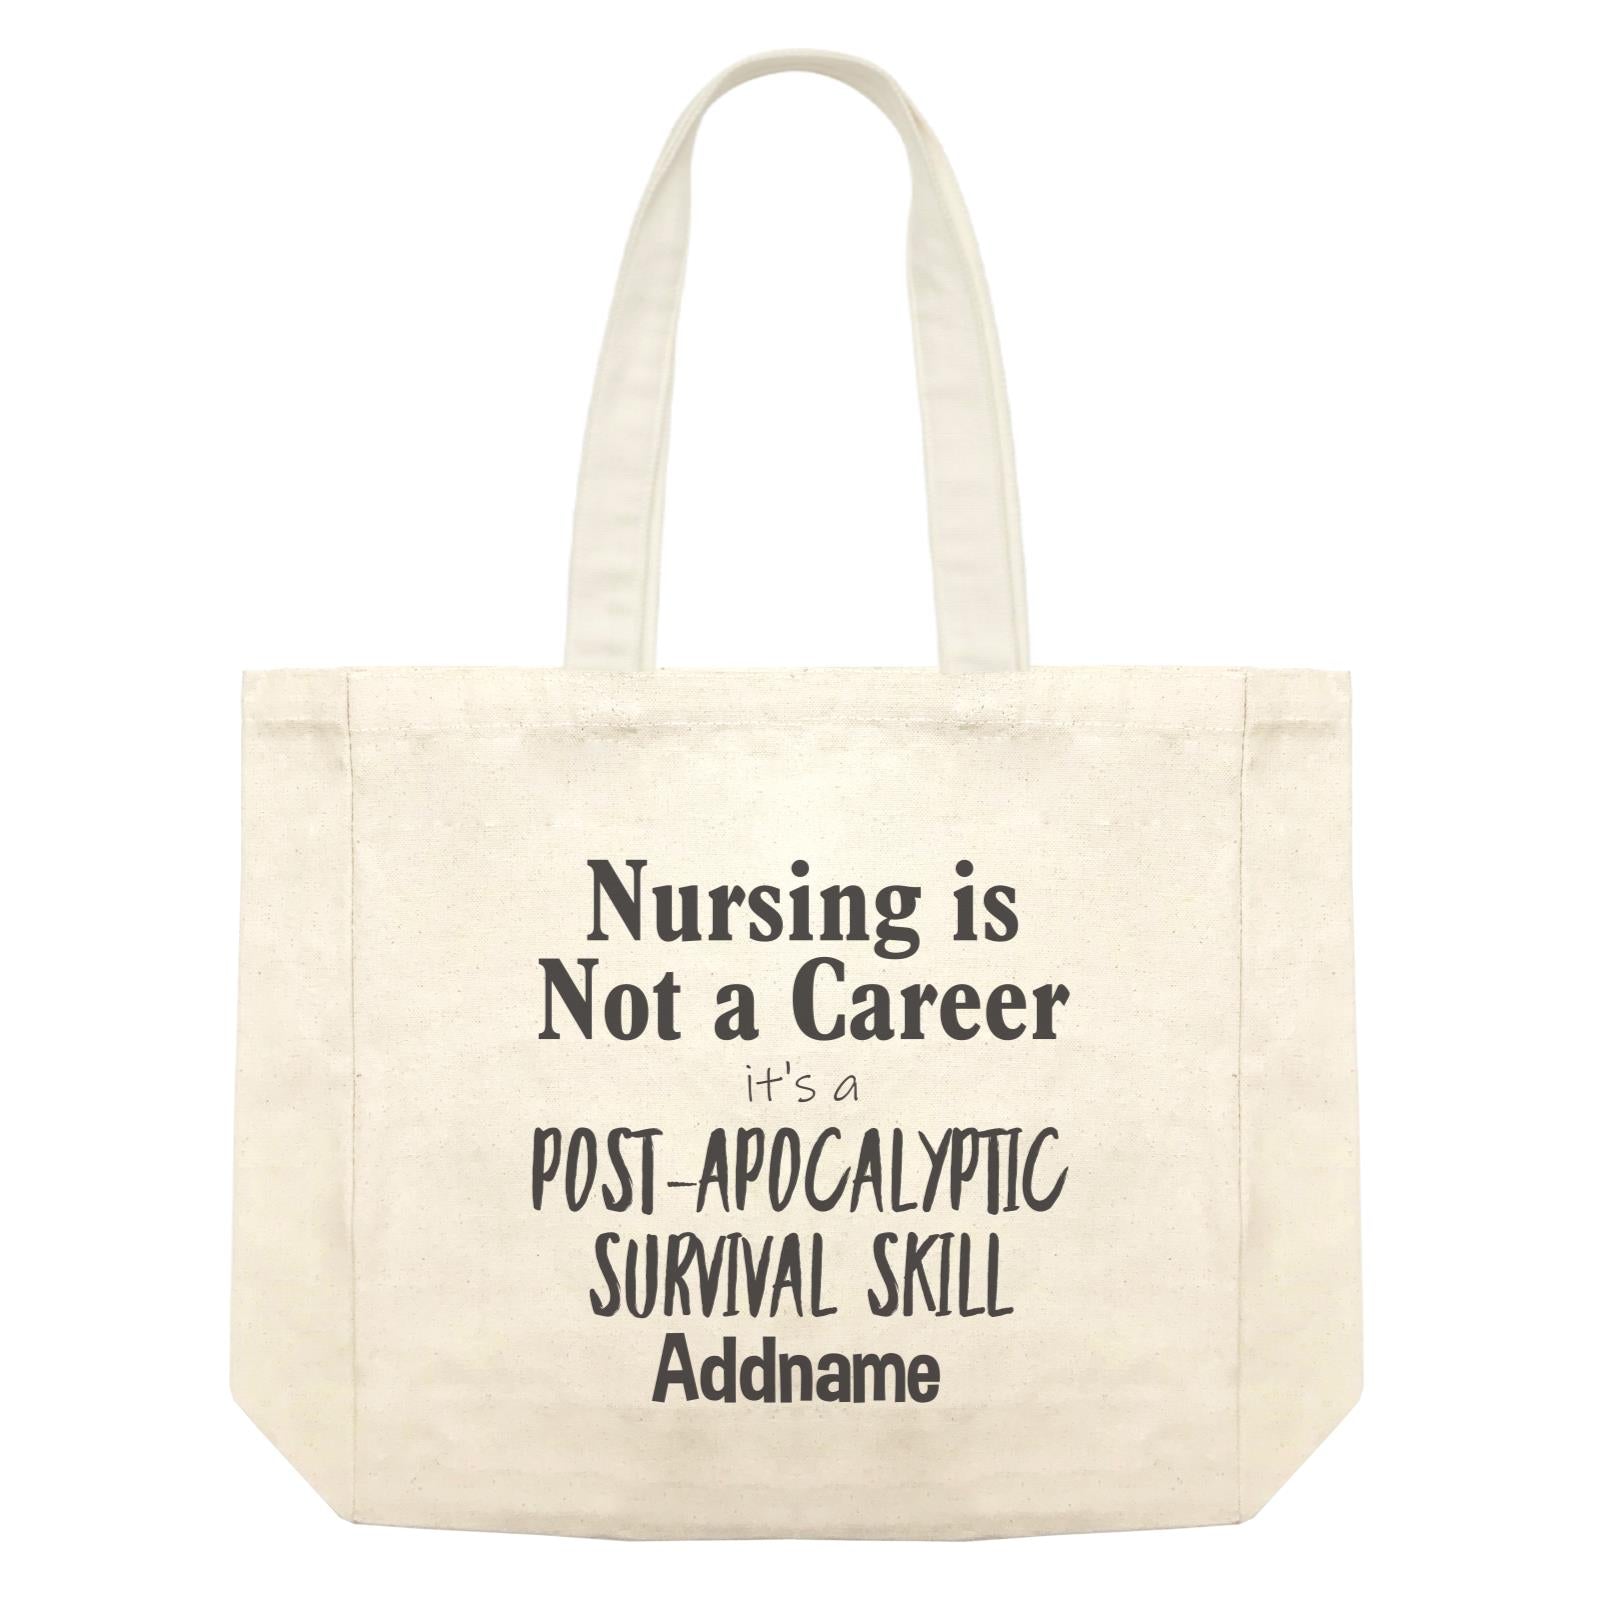 Nursing is Not a Career, It's a Post-Apocalyptic Survival Skill Shopping Bag